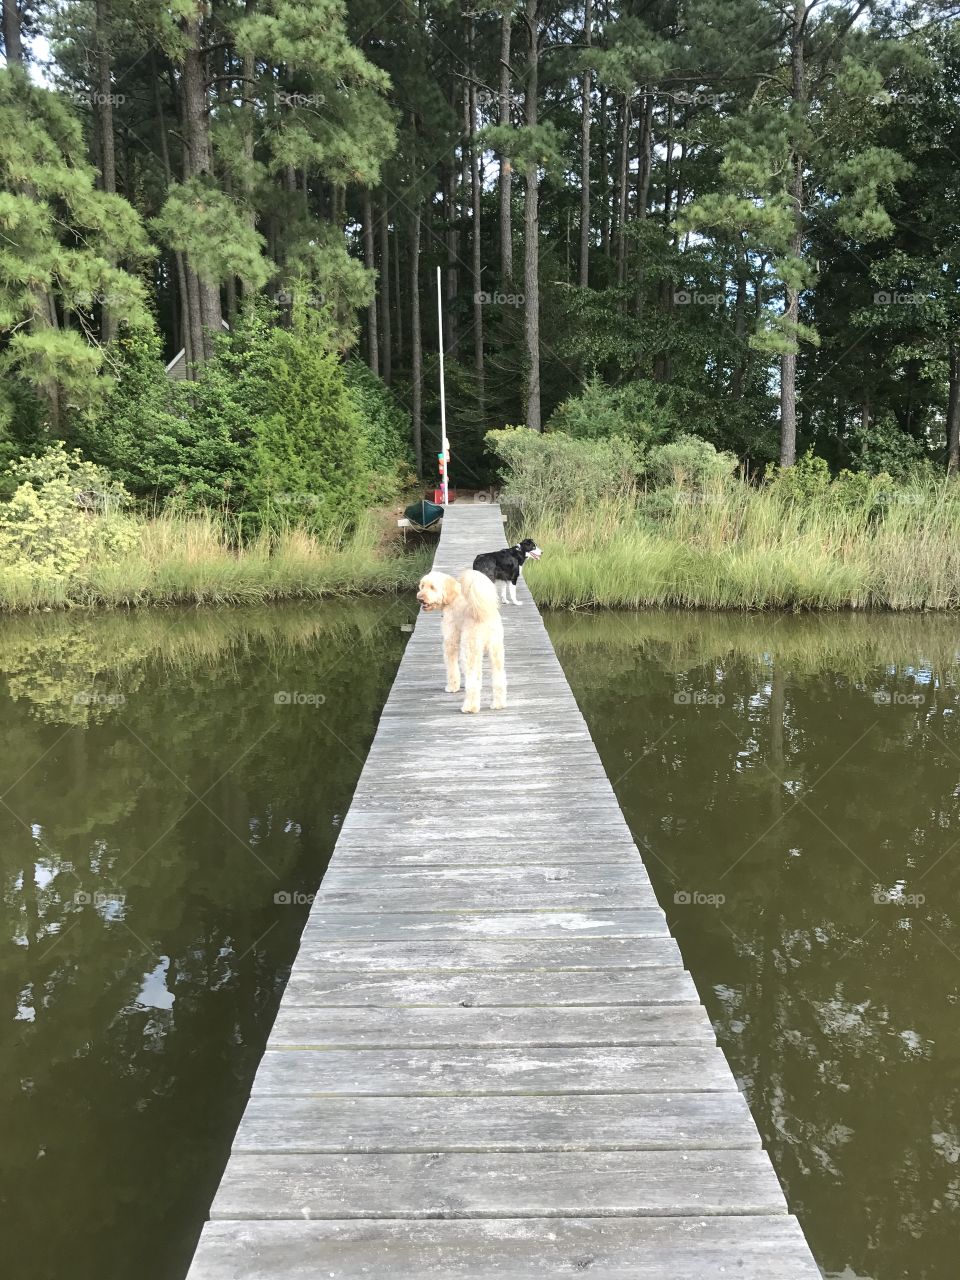 Dogs on the dock